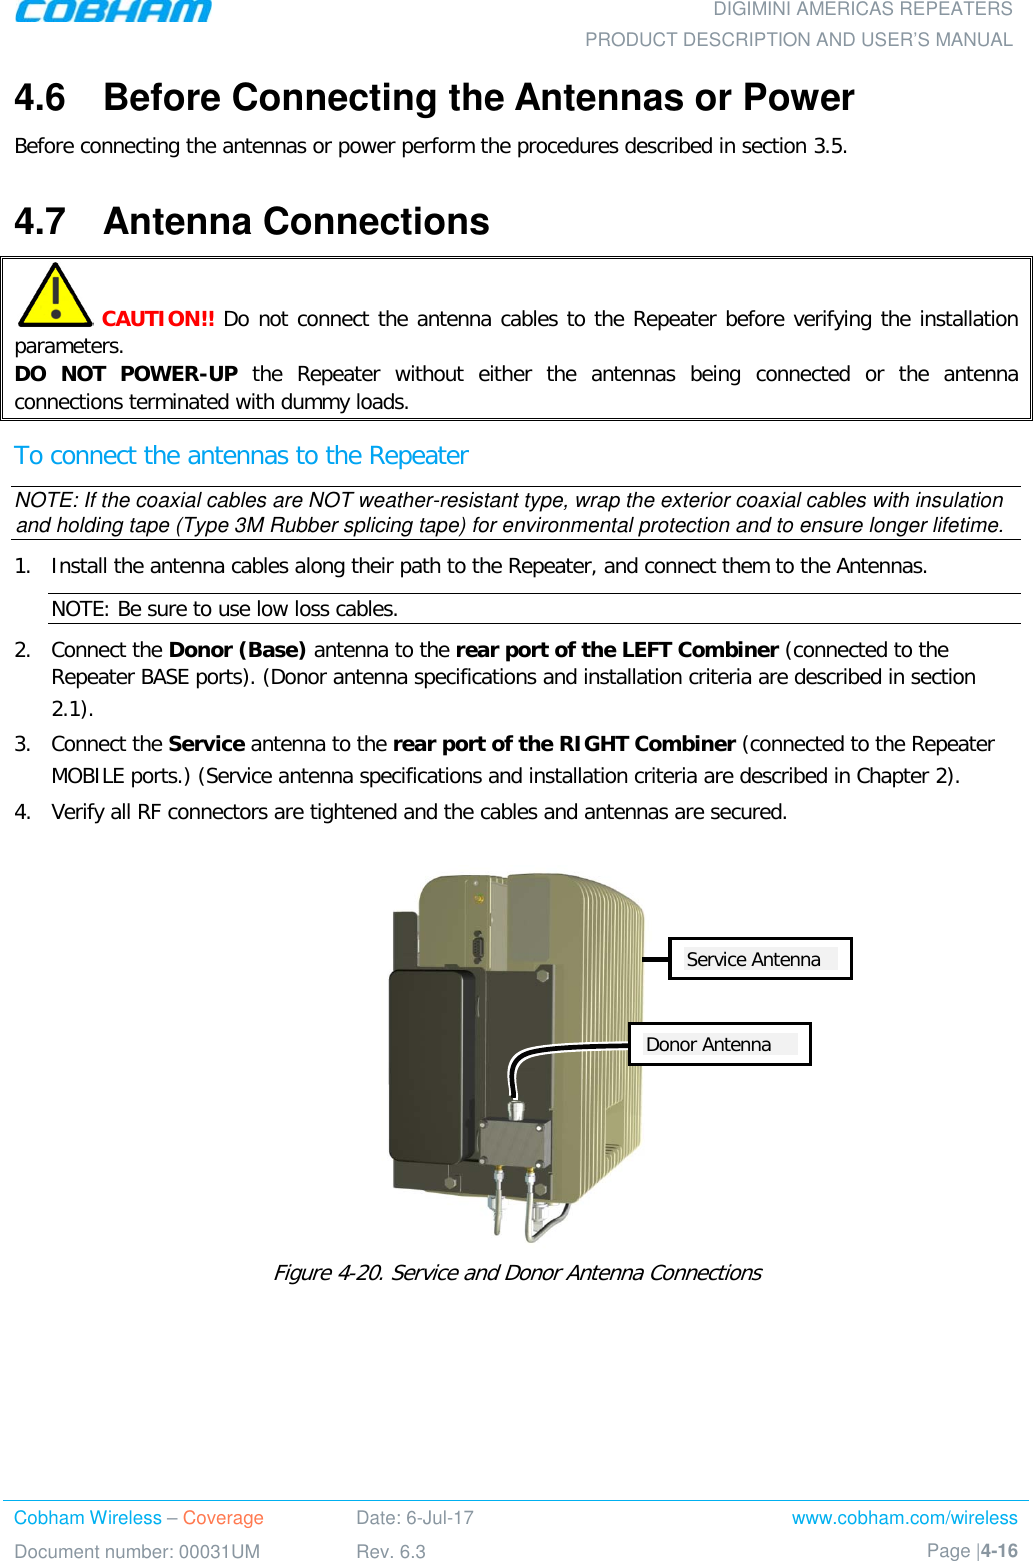  DIGIMINI AMERICAS REPEATERS PRODUCT DESCRIPTION AND USER’S MANUAL Cobham Wireless – Coverage Date: 6-Jul-17 www.cobham.com/wireless Document number: 00031UM Rev. 6.3 Page |4-16  4.6  Before Connecting the Antennas or Power Before connecting the antennas or power perform the procedures described in section  3.5. 4.7  Antenna Connections   CAUTION!! Do not connect the antenna cables to the Repeater before verifying the installation parameters. DO NOT POWER-UP the Repeater without either the antennas being connected or the antenna connections terminated with dummy loads. To connect the antennas to the Repeater NOTE: If the coaxial cables are NOT weather-resistant type, wrap the exterior coaxial cables with insulation and holding tape (Type 3M Rubber splicing tape) for environmental protection and to ensure longer lifetime. 1.  Install the antenna cables along their path to the Repeater, and connect them to the Antennas. NOTE: Be sure to use low loss cables. 2.  Connect the Donor (Base) antenna to the rear port of the LEFT Combiner (connected to the Repeater BASE ports). (Donor antenna specifications and installation criteria are described in section  2.1). 3.  Connect the Service antenna to the rear port of the RIGHT Combiner (connected to the Repeater MOBILE ports.) (Service antenna specifications and installation criteria are described in Chapter  2). 4.  Verify all RF connectors are tightened and the cables and antennas are secured.   Figure  4-20. Service and Donor Antenna Connections  Donor Antenna Service Antenna 